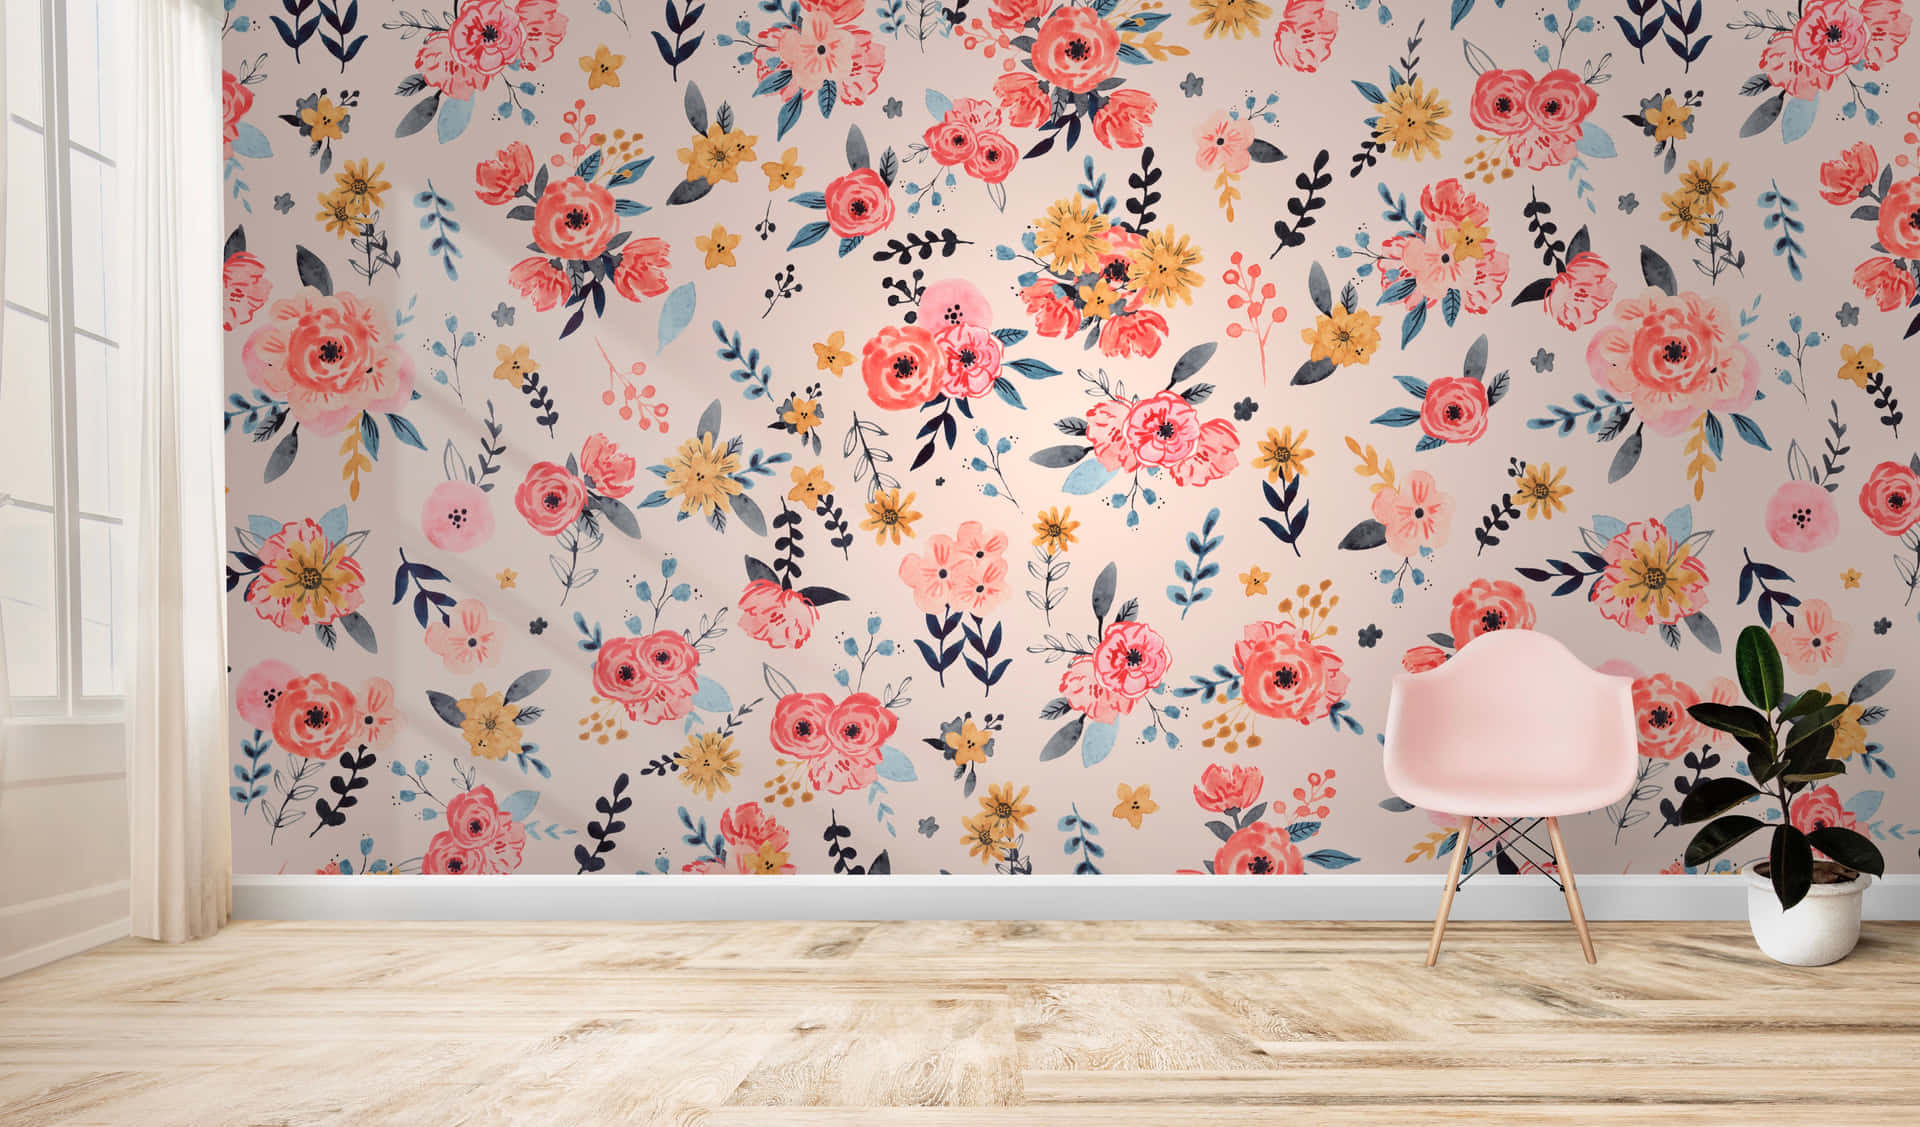 Watercolor Floral In A Living Room Wallpaper